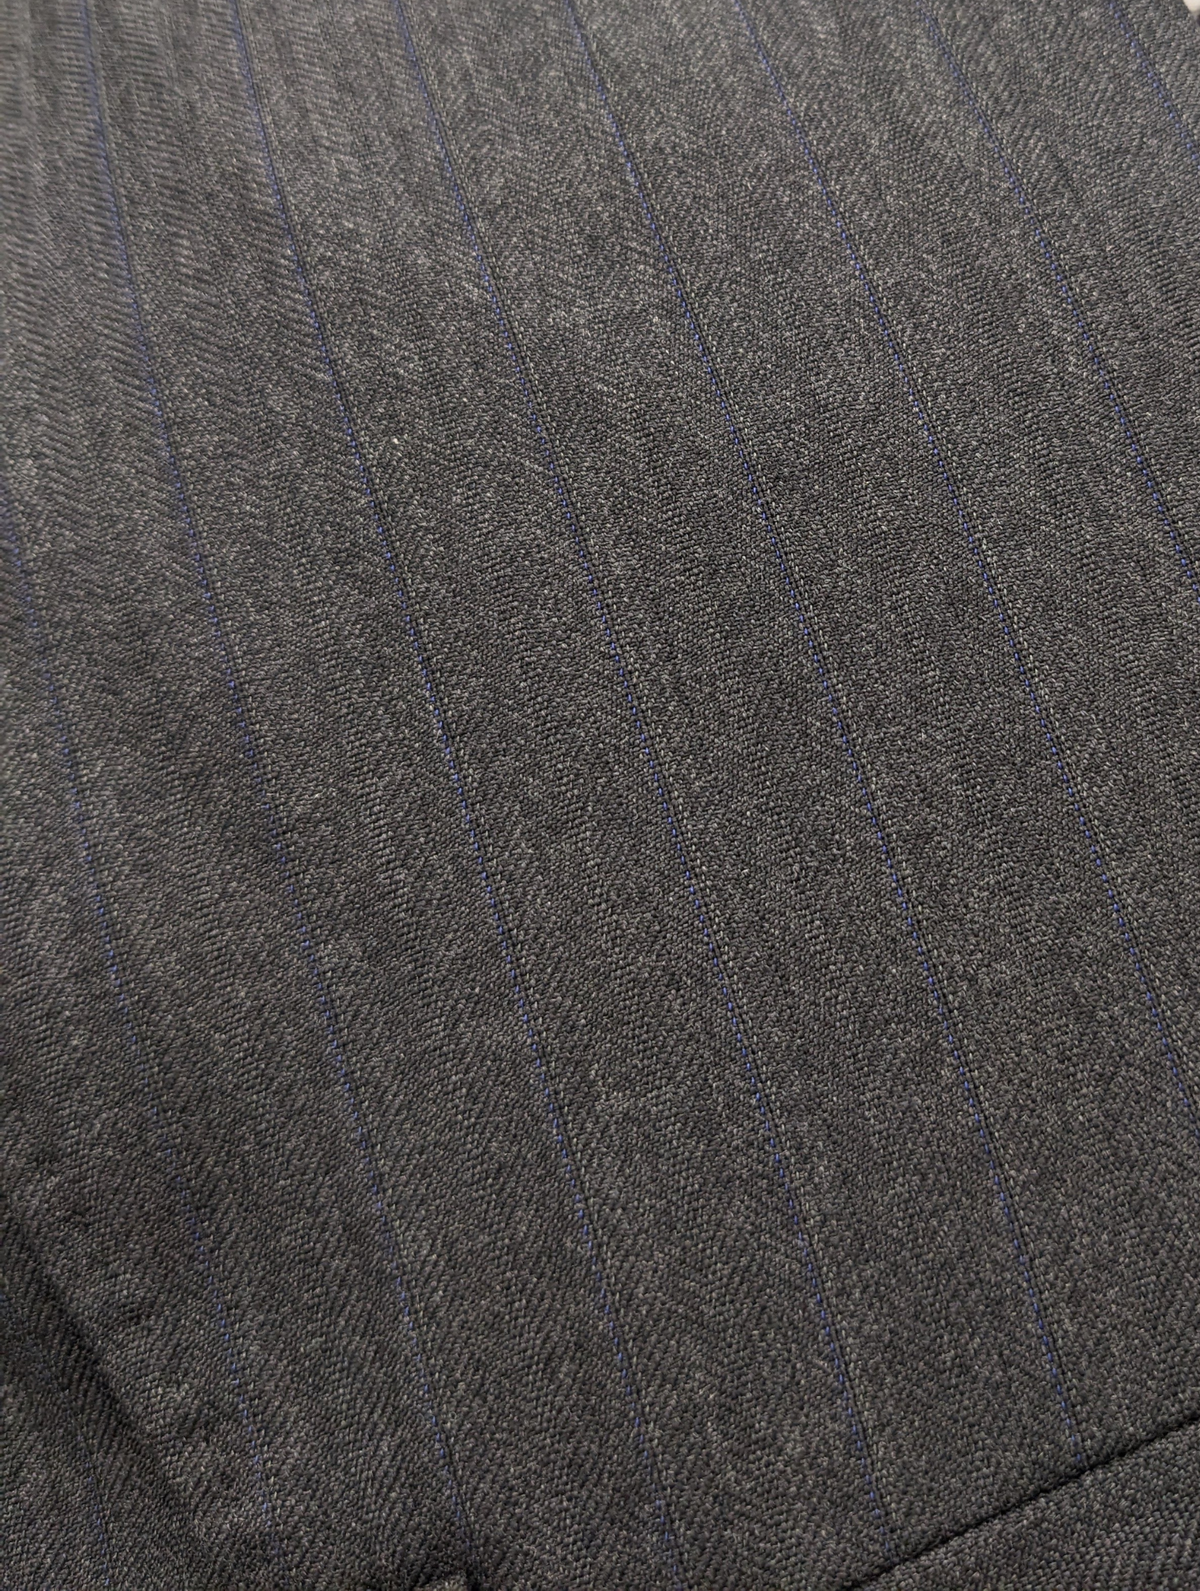 Canali 1934 Mens Gray Striped 44L Drop 7 100% Wool 2 Button 2 Piece Suit